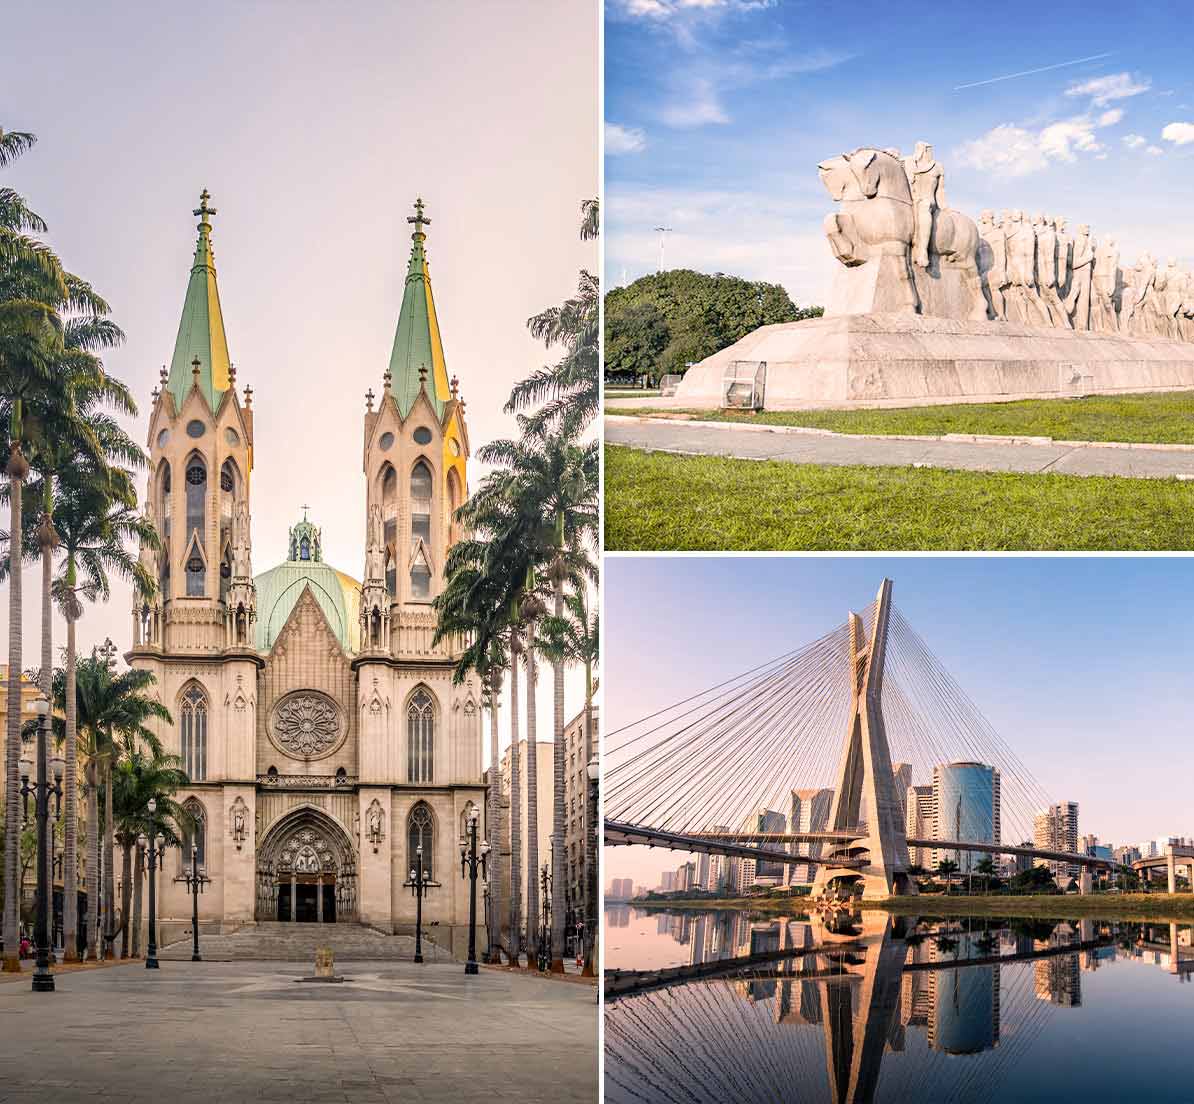 A collage showing a classic church, a monumental statue, and a bridge in Sao Paulo.